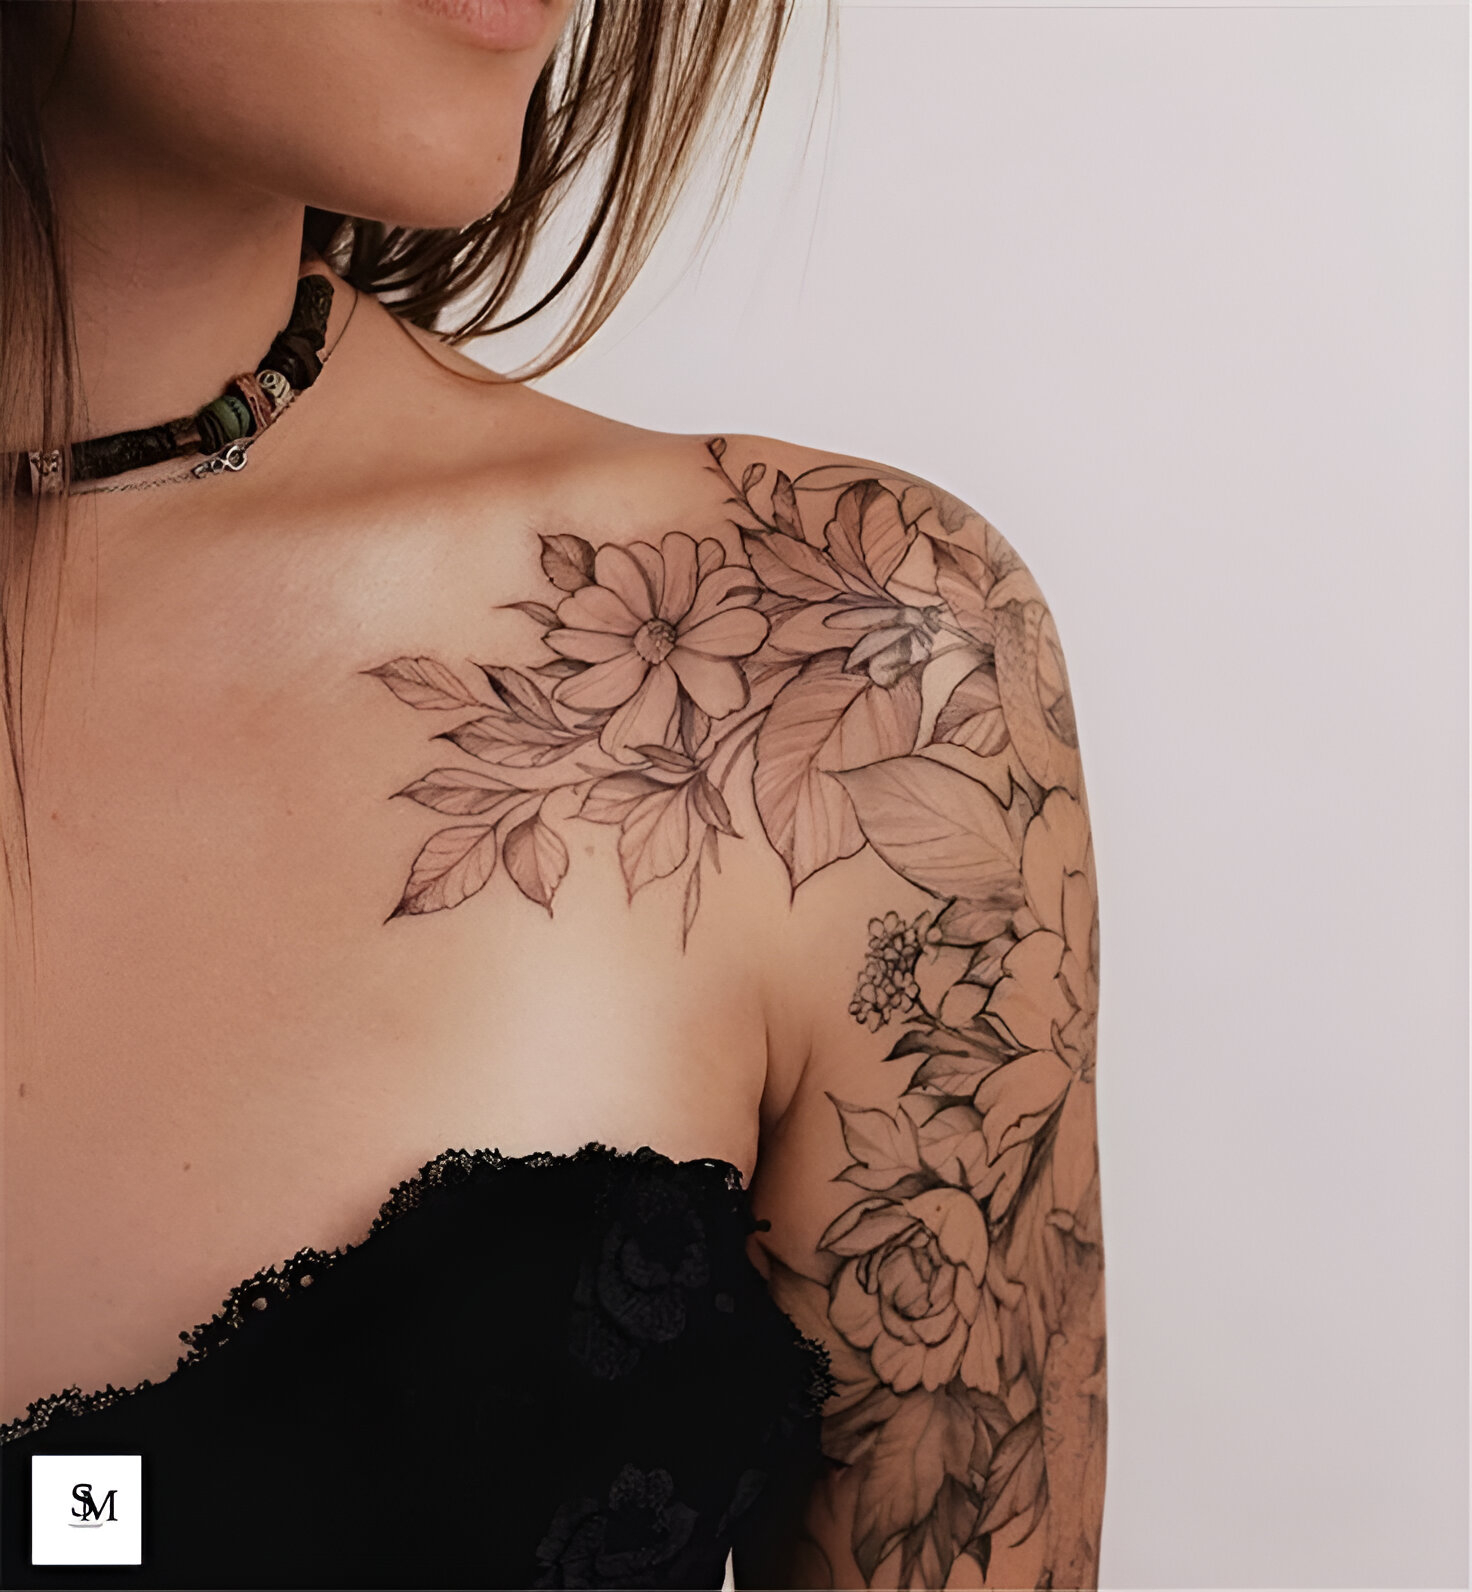 Stunning Shoulder Tattoo With Floral Art